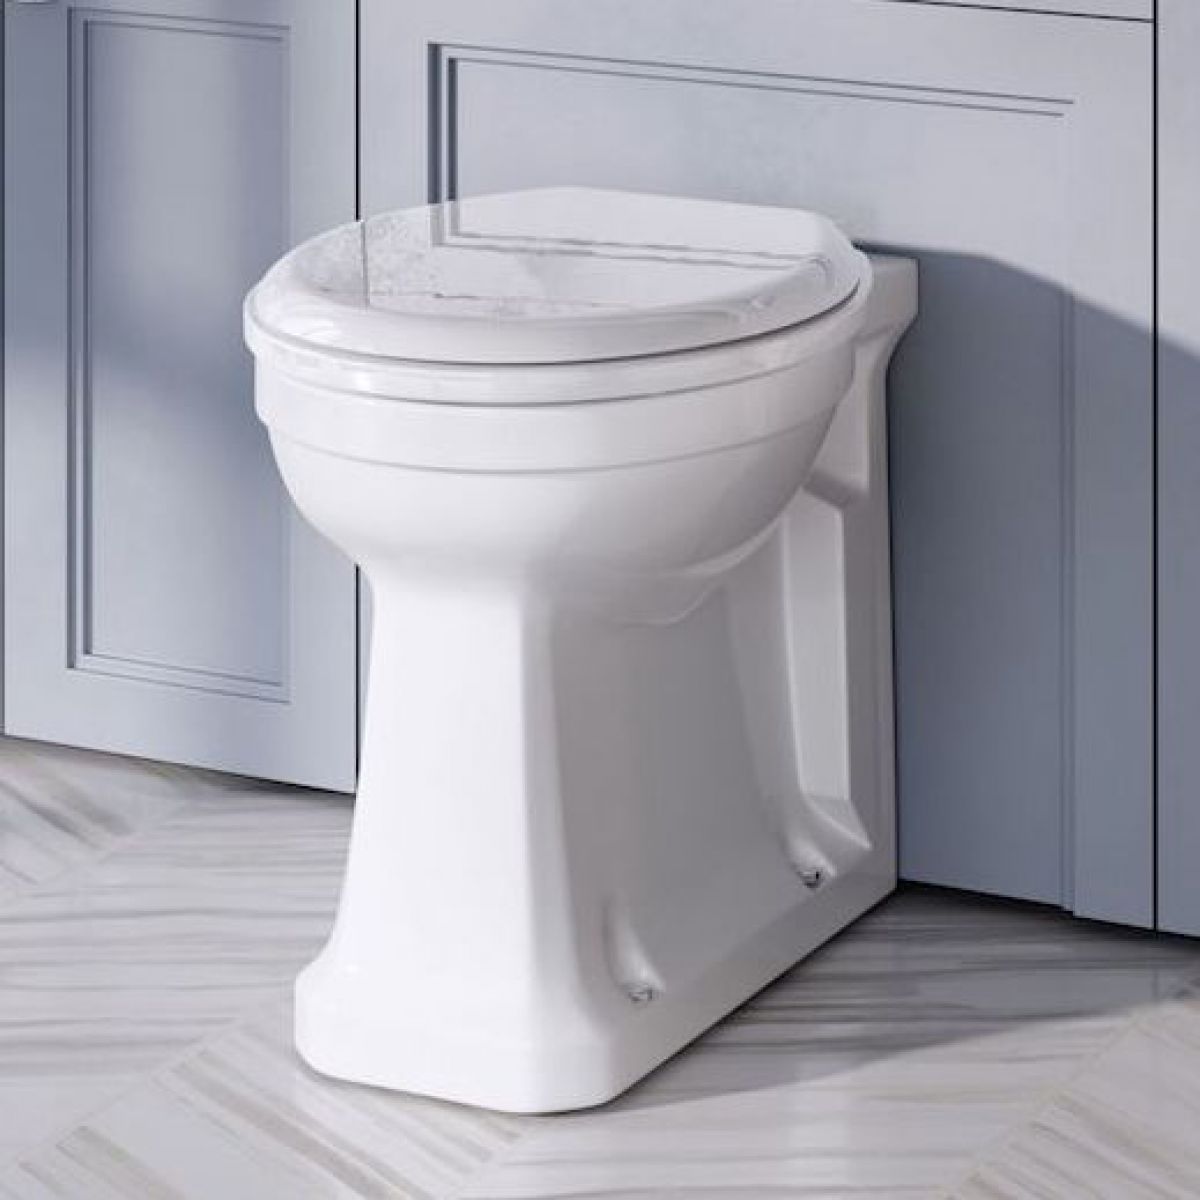 image example of a back to wall toilet